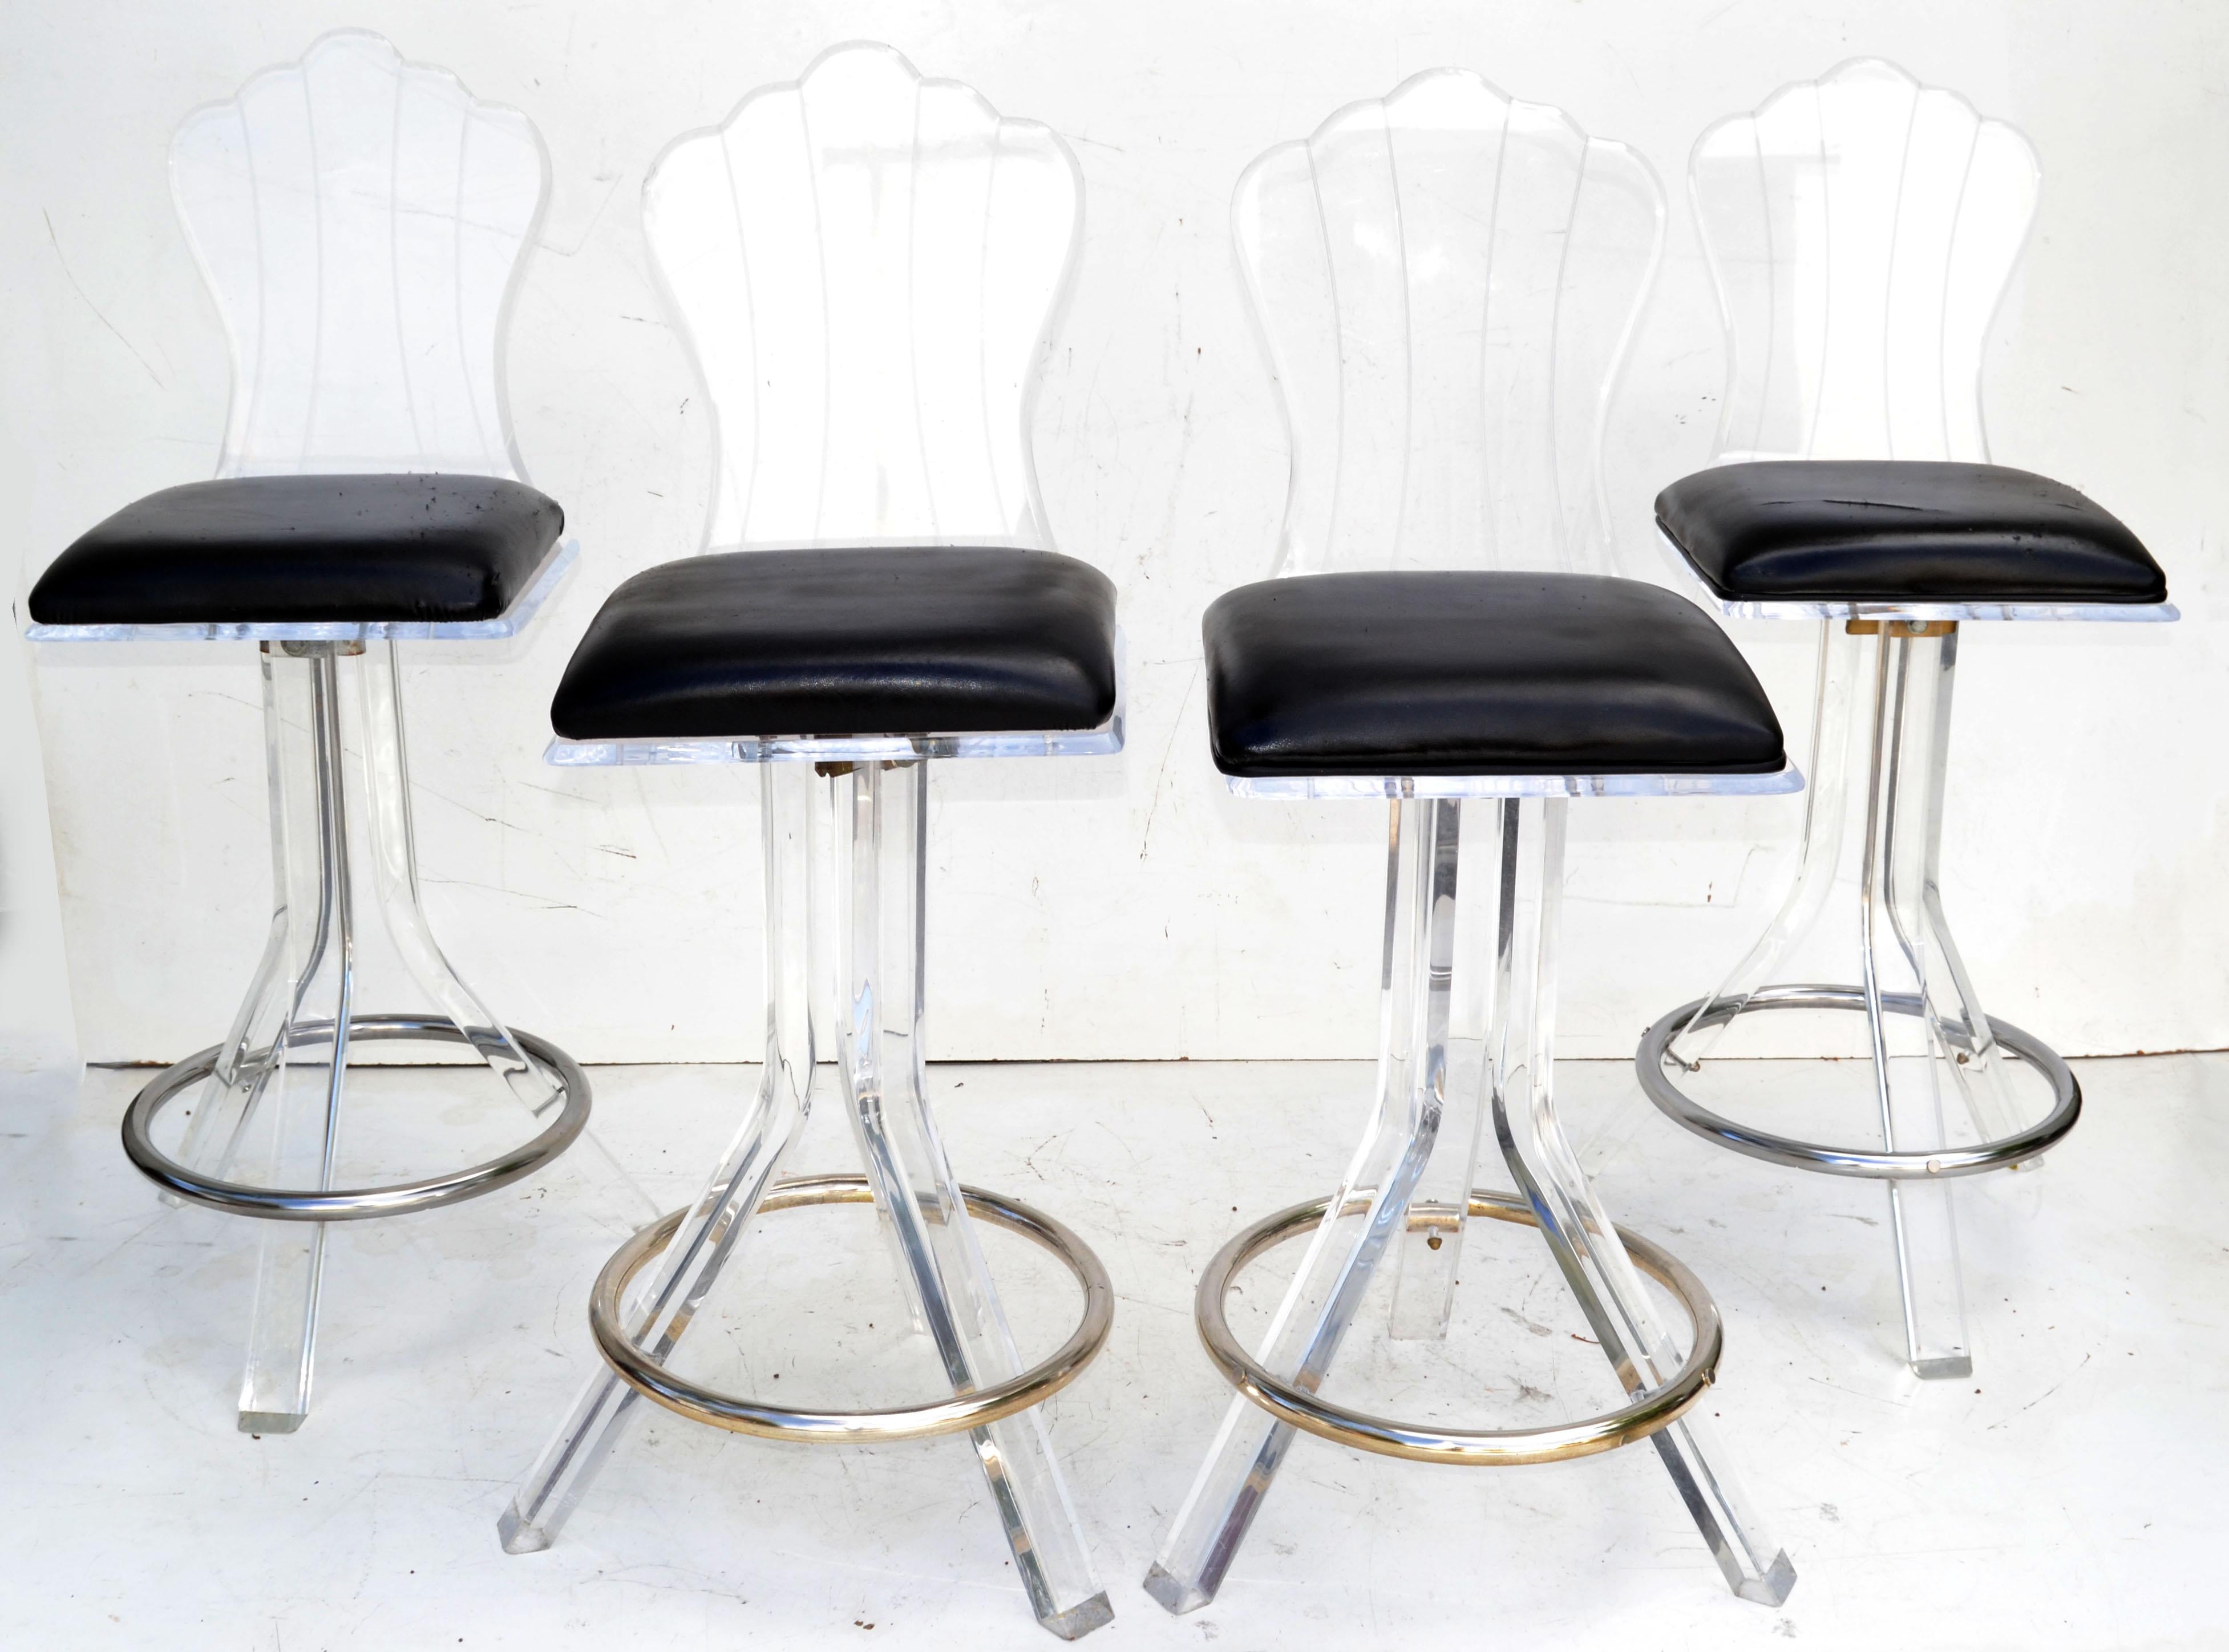 Exceptional Mid-Century Modern fantastic and rare set of four Lucite 3 legged swivel bar stools with Chrome Round Footrest by Hill Manufacturers made in America in the 1970s.
Footrest Height: 7 inches.
In original vintage condition.
The black